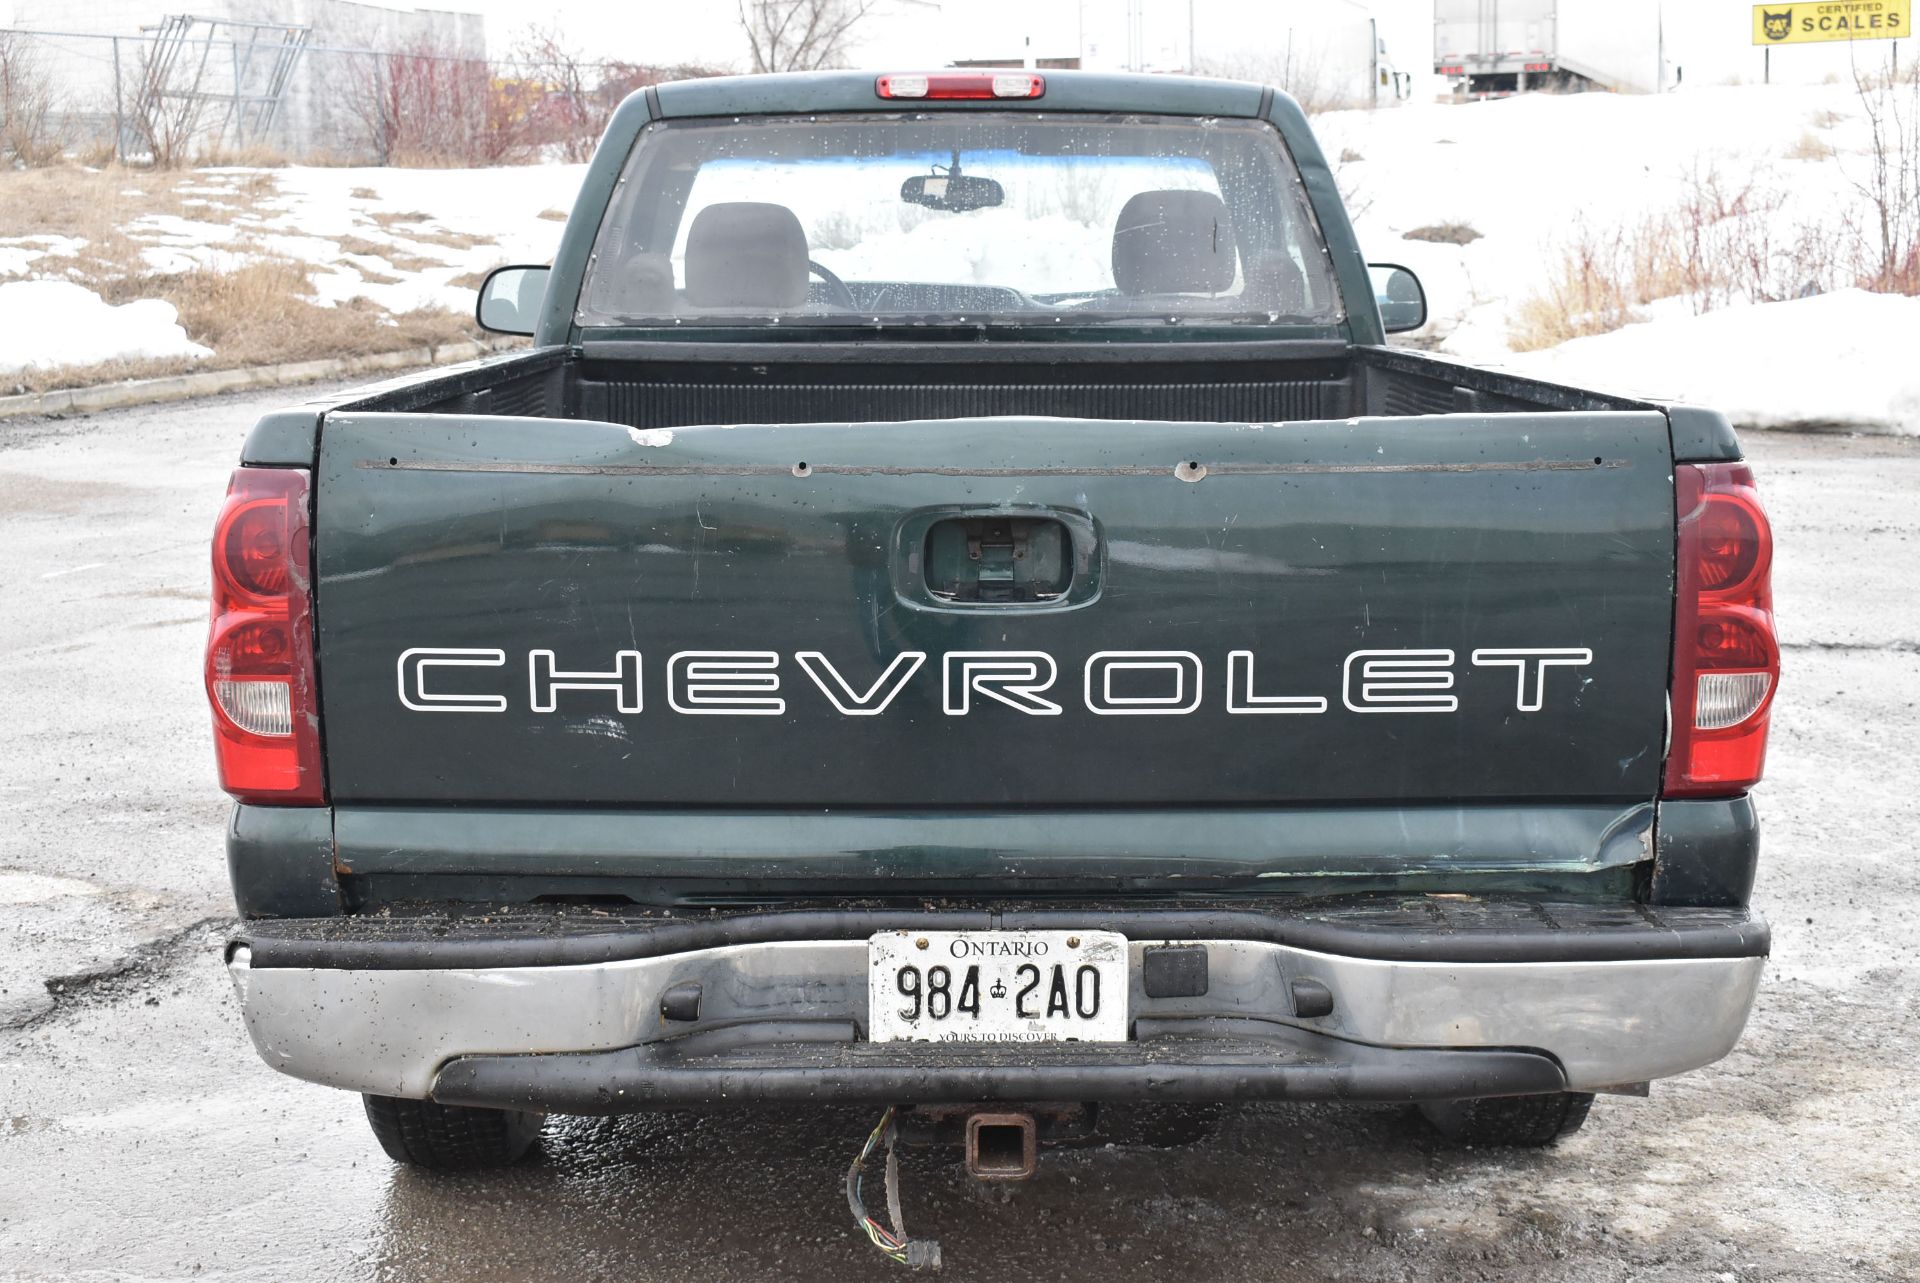 CHEVROLET (2003) SILVERADO 1500 PICKUP TRUCK WITH 4.3L 6 CYL. GAS ENGINE, AUTOMATIC TRANSMISSION, - Image 4 of 12